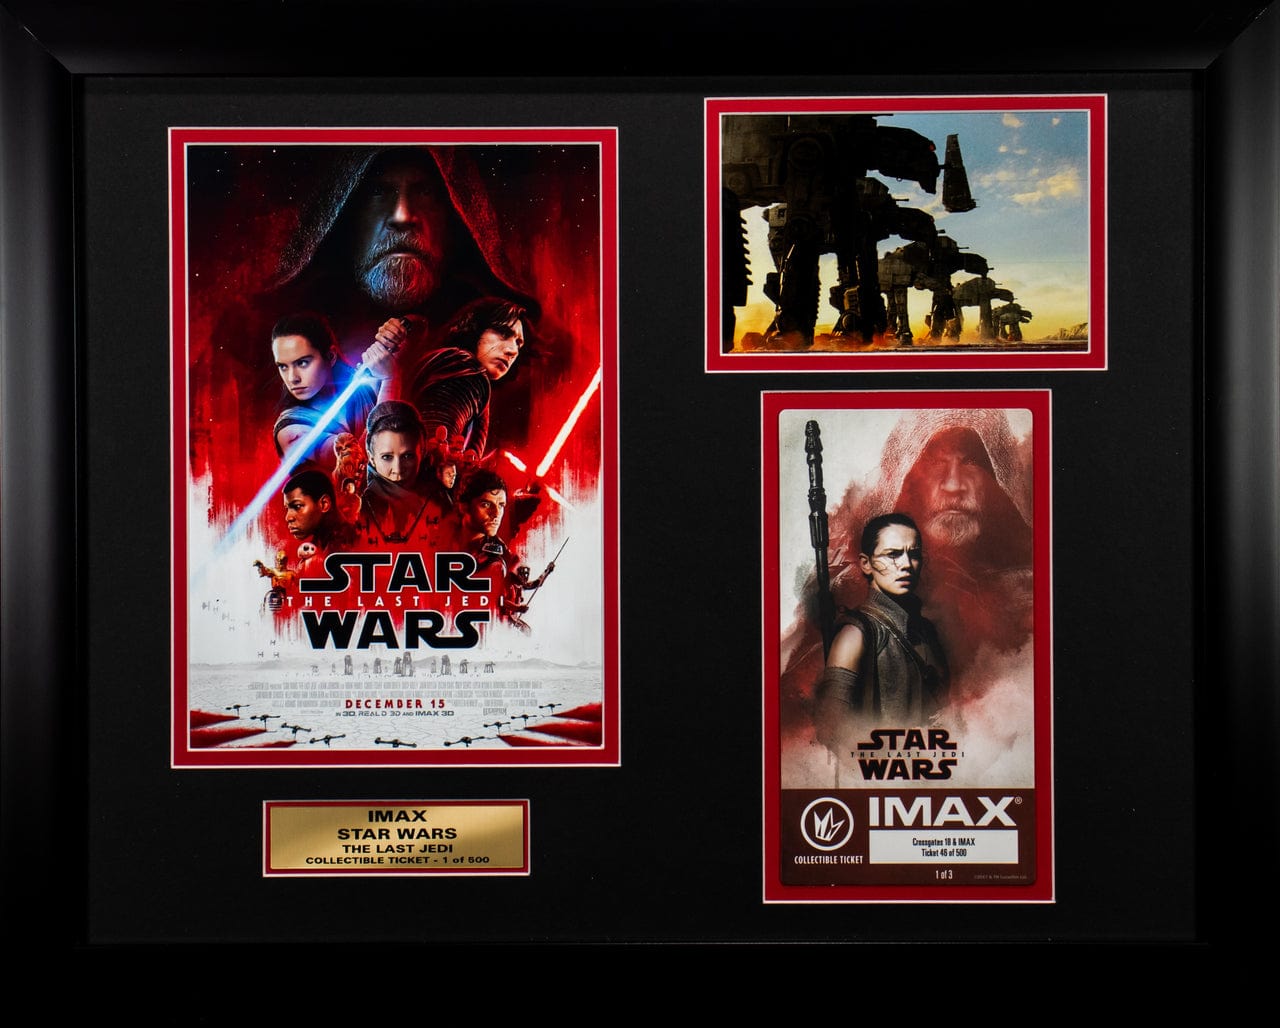 IMAX Collectible Movie Ticket: STAR WARS: The Last Jedi (view one)